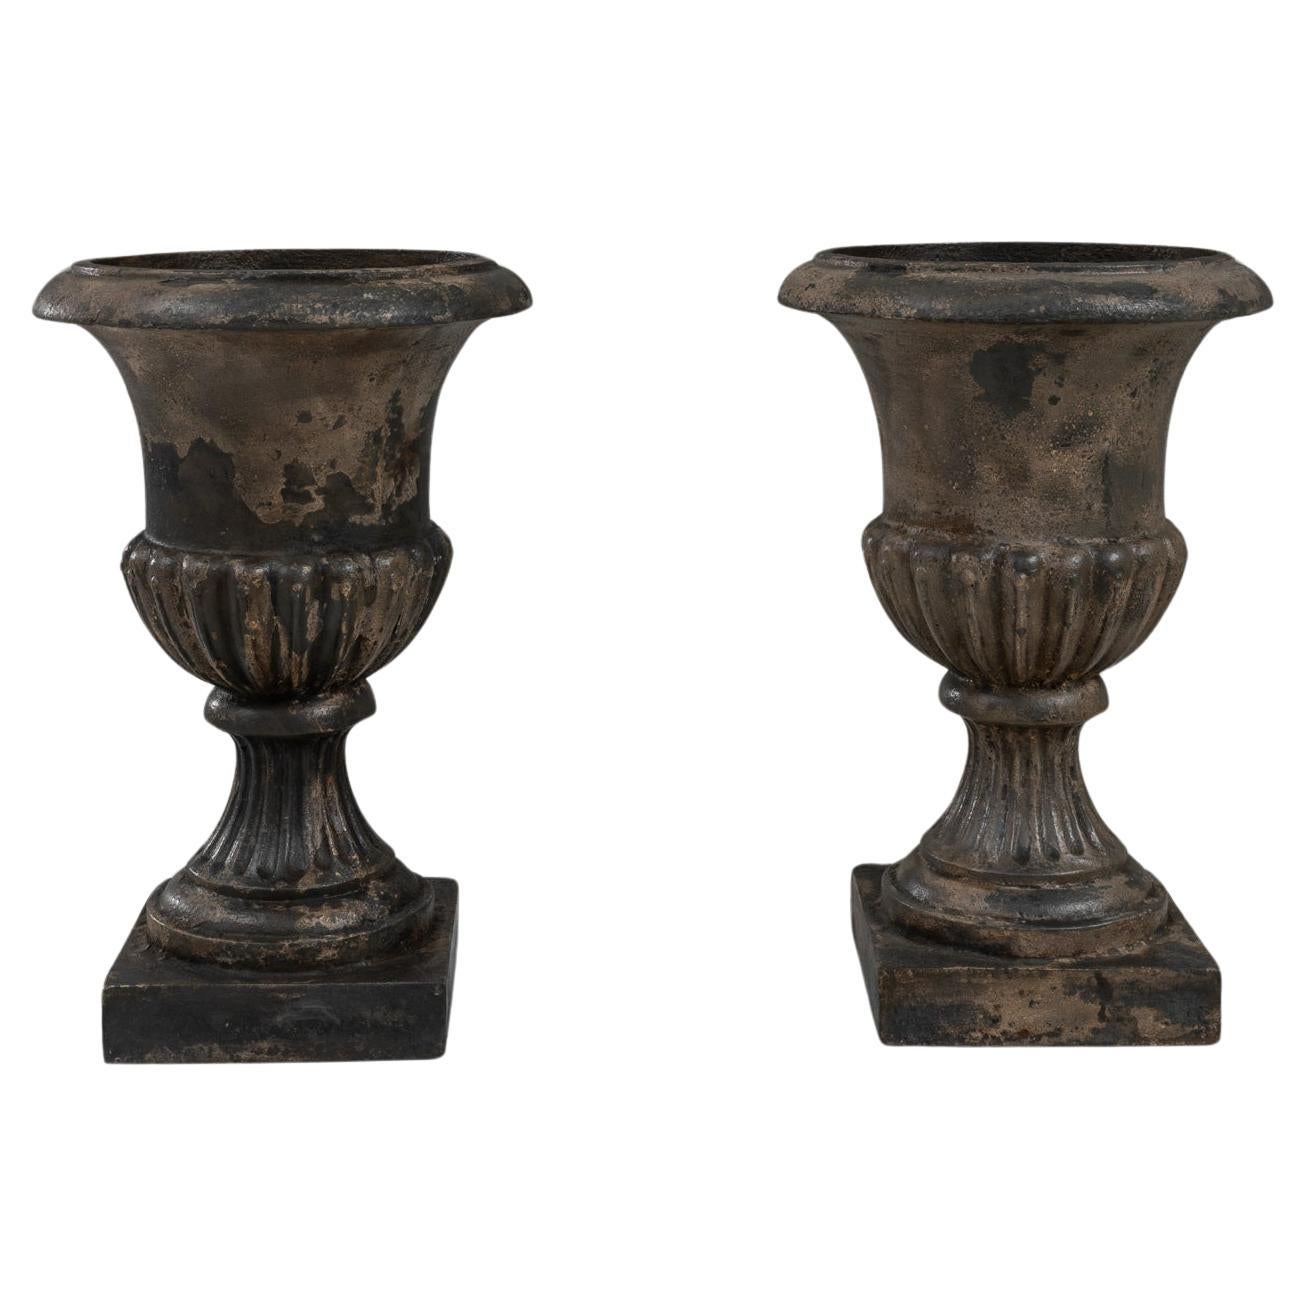 19th Century French Cast Iron Planters, a Pair